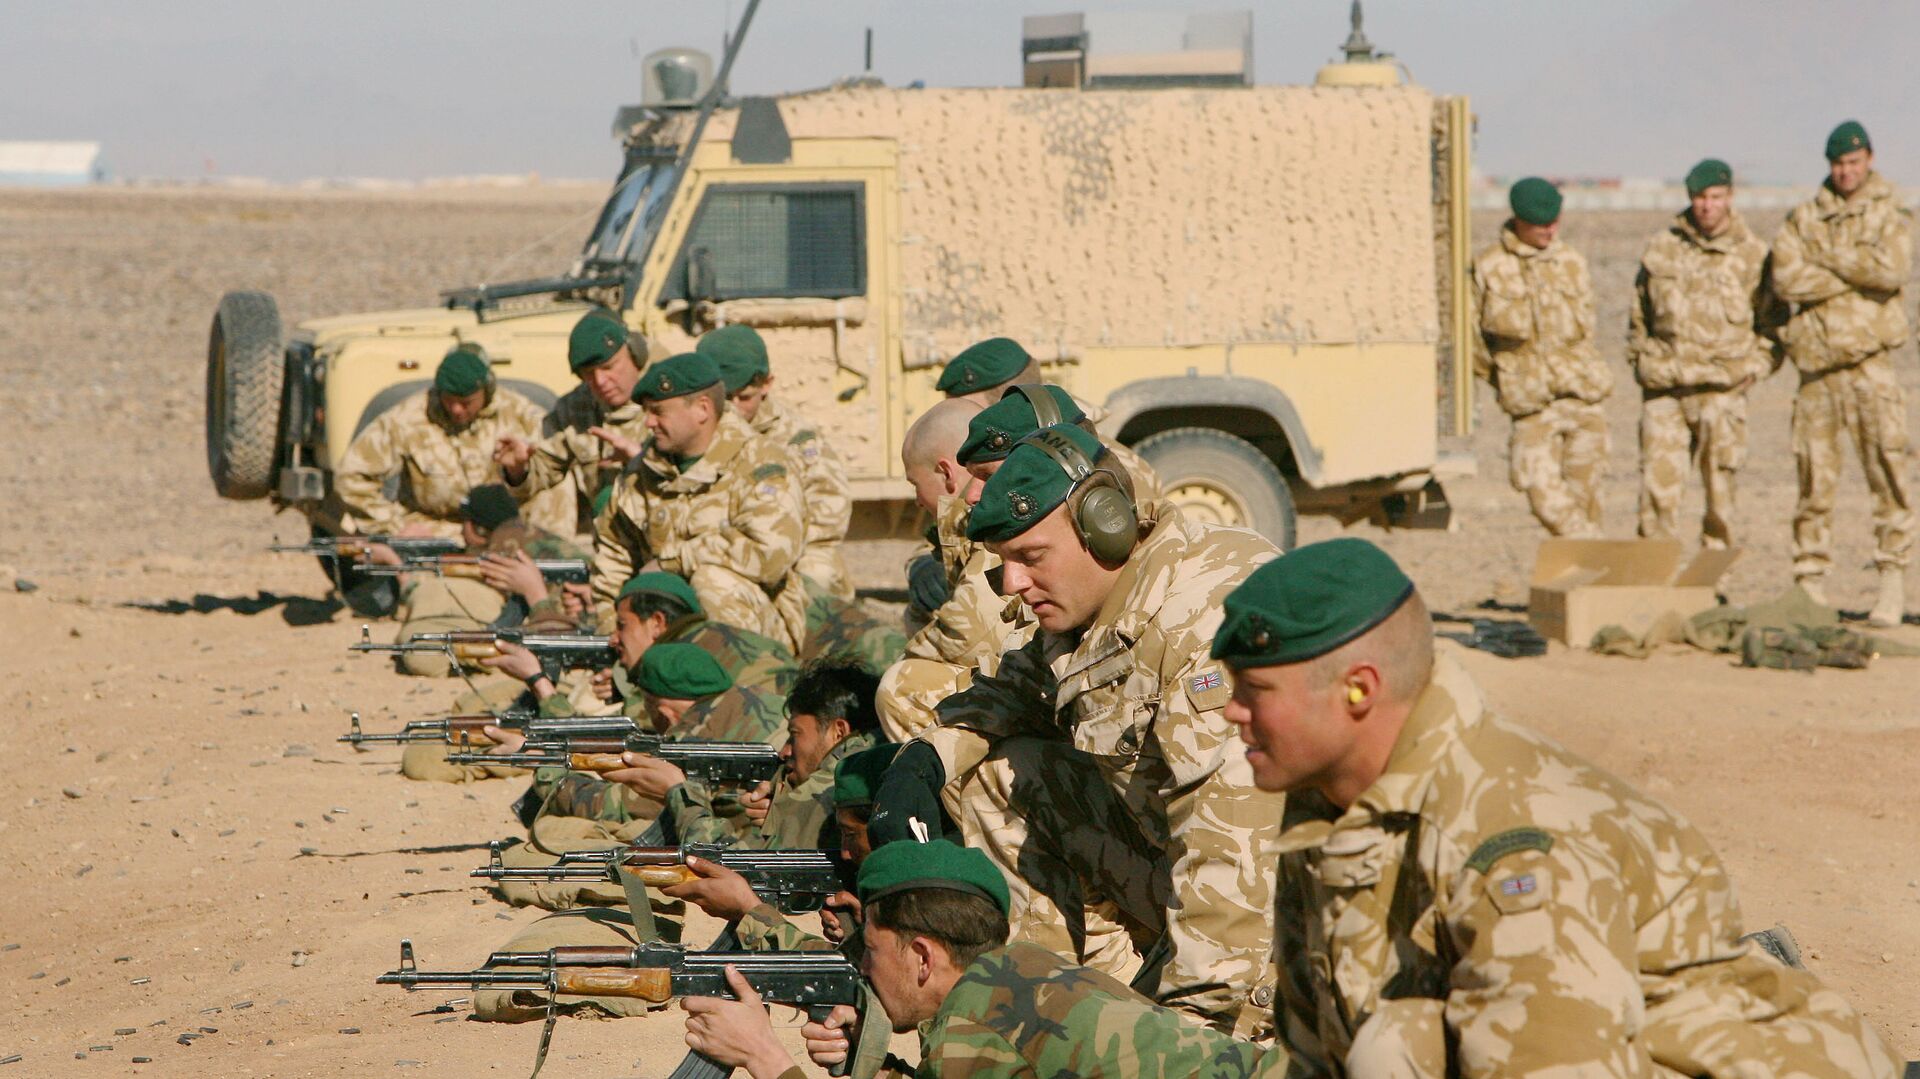 British Army officers from Operational Mentoring Liaison Training (OMLT) company train Afghan National Army or ANA, soldiers in firearms, near Camp Bastion, southern Afghanistan, Tuesday, Jan. 16, 2007 - اسپوتنیک افغانستان  , 1920, 22.08.2022